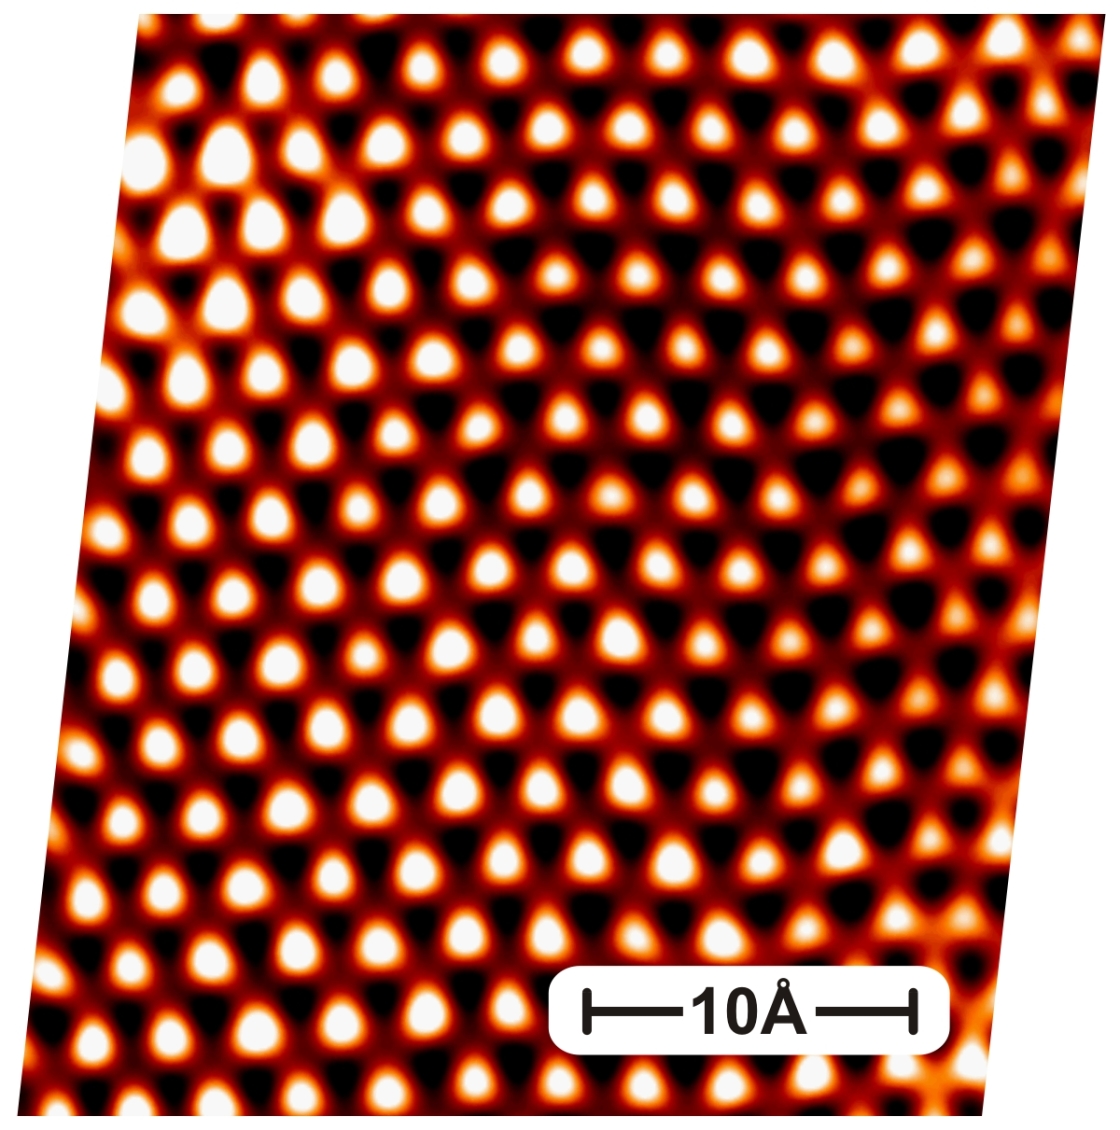 Figure: Graphene layer on nickel with a regular distortion of the honeycomb structure - enlarged view